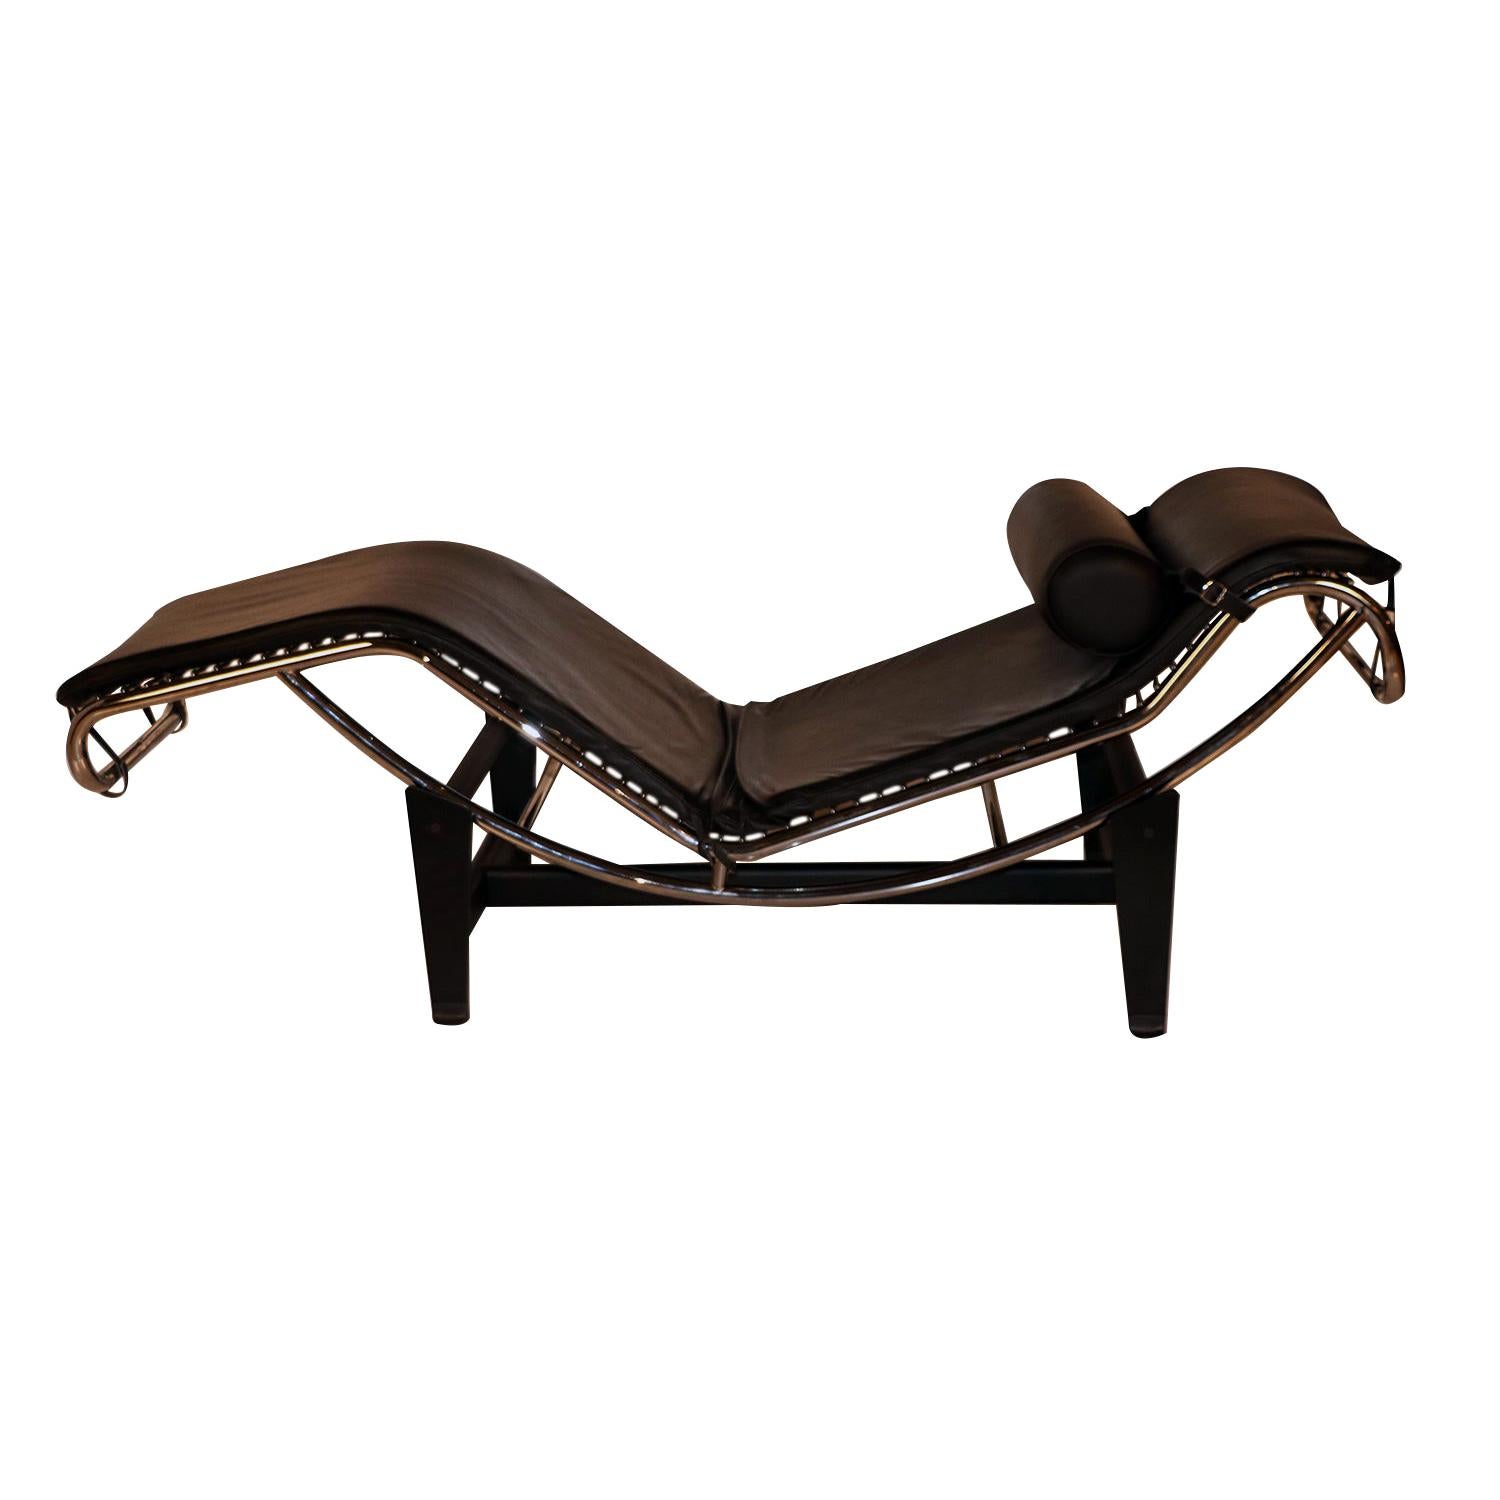 Midcentury Le Corbusier LC4 Style Leather Chaise Lounge Daybed